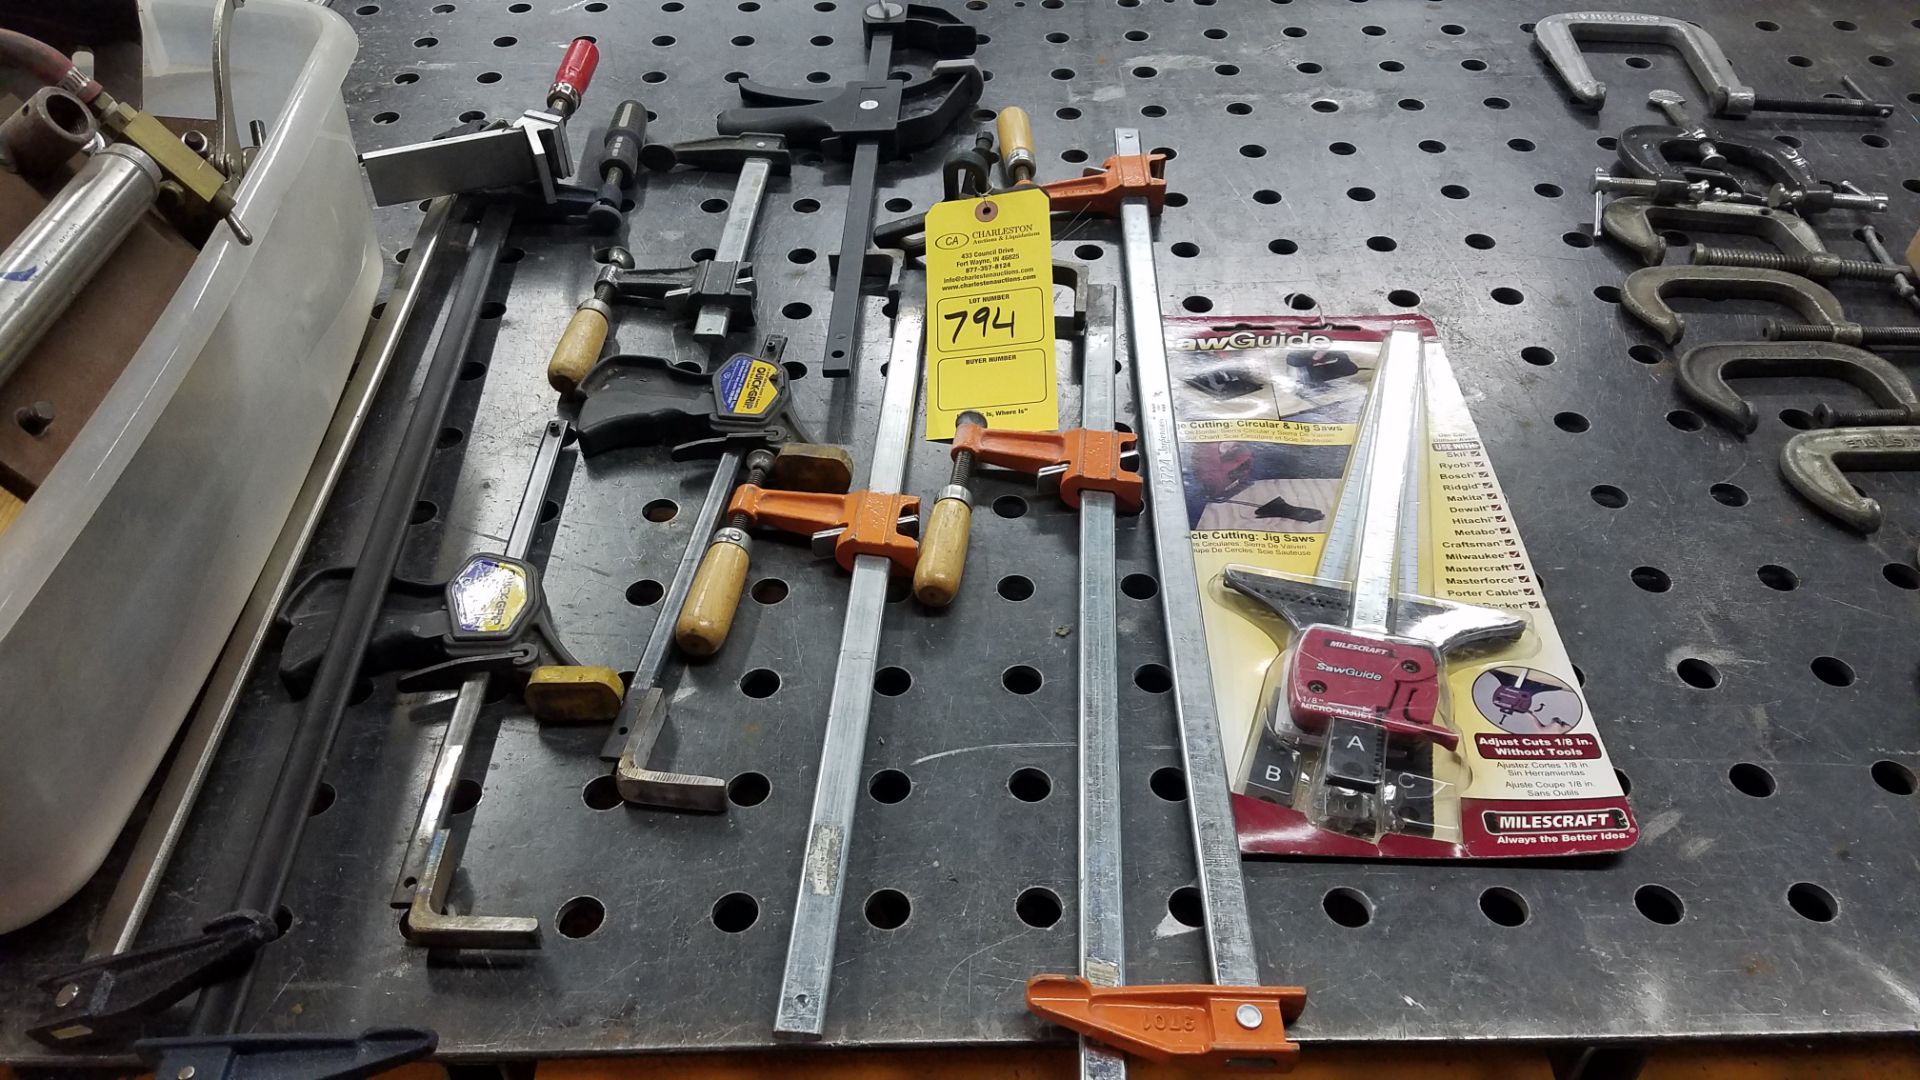 MILES CRAFT SAW GUIDE (10) BAR CLAMPS (LOCATED AT 255 S. MADISON ST. NAPPANEE IN 46550)